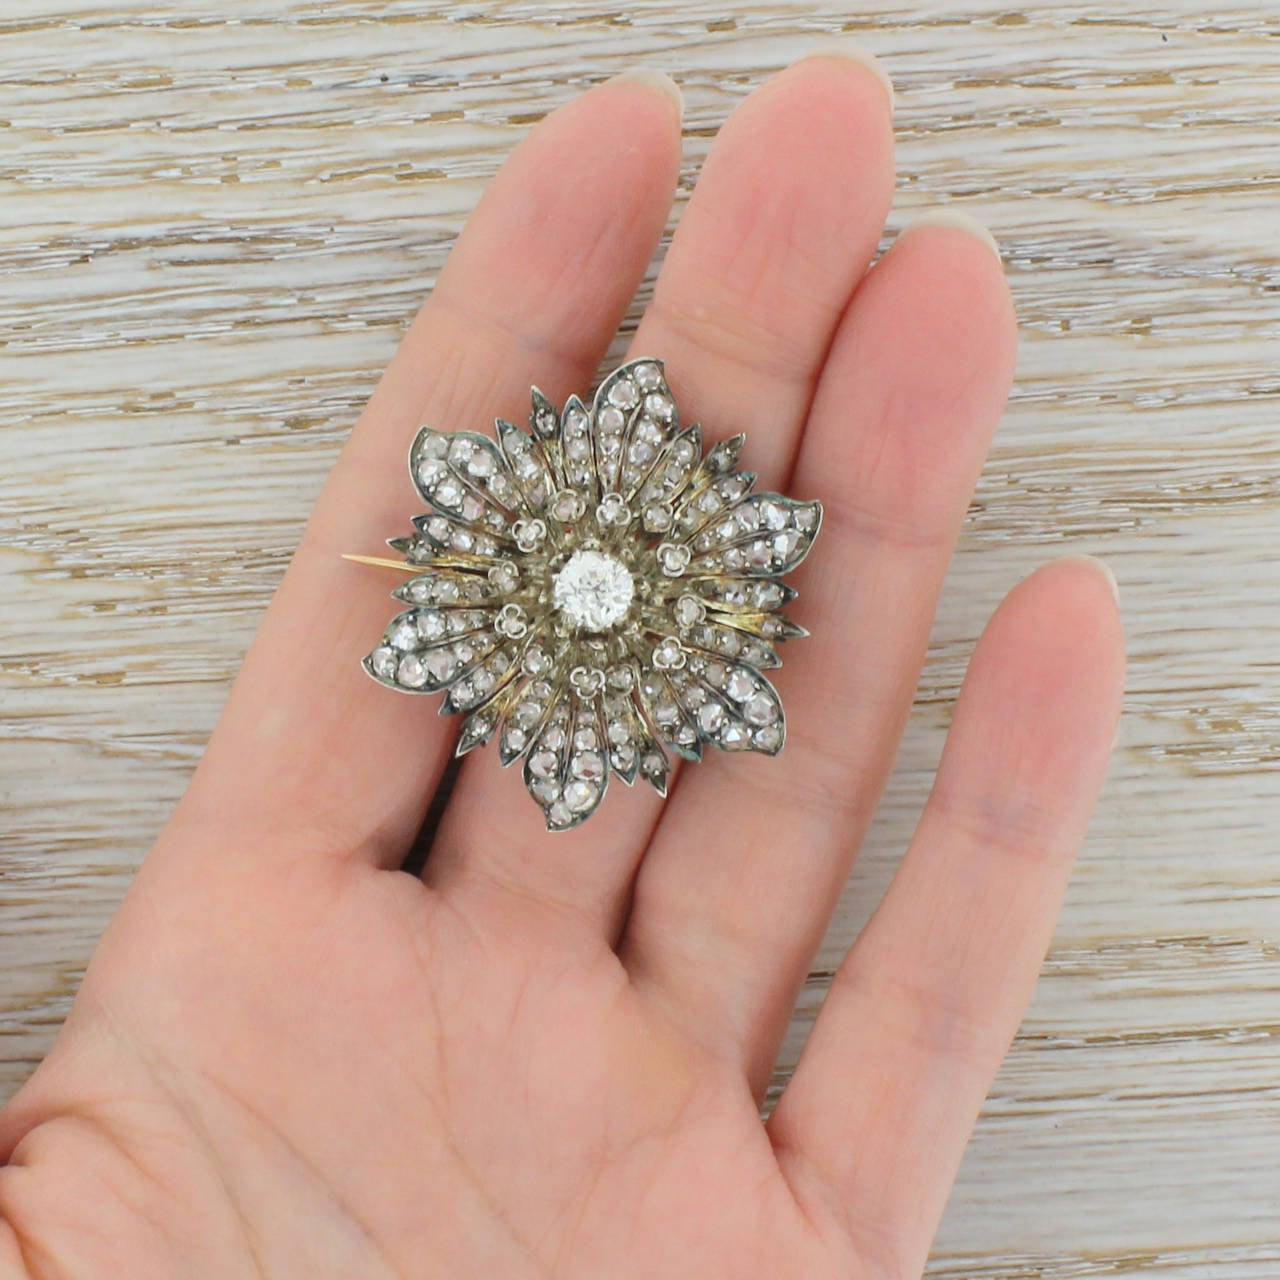 An highly impressive flower brooch; ornate, detailed and exquisitely crafted. Set with 101 rose cut diamonds and centred by one larger old miner cut diamond with a total estimated diamond weight of 2.90 carat. The stones are set in silver with the